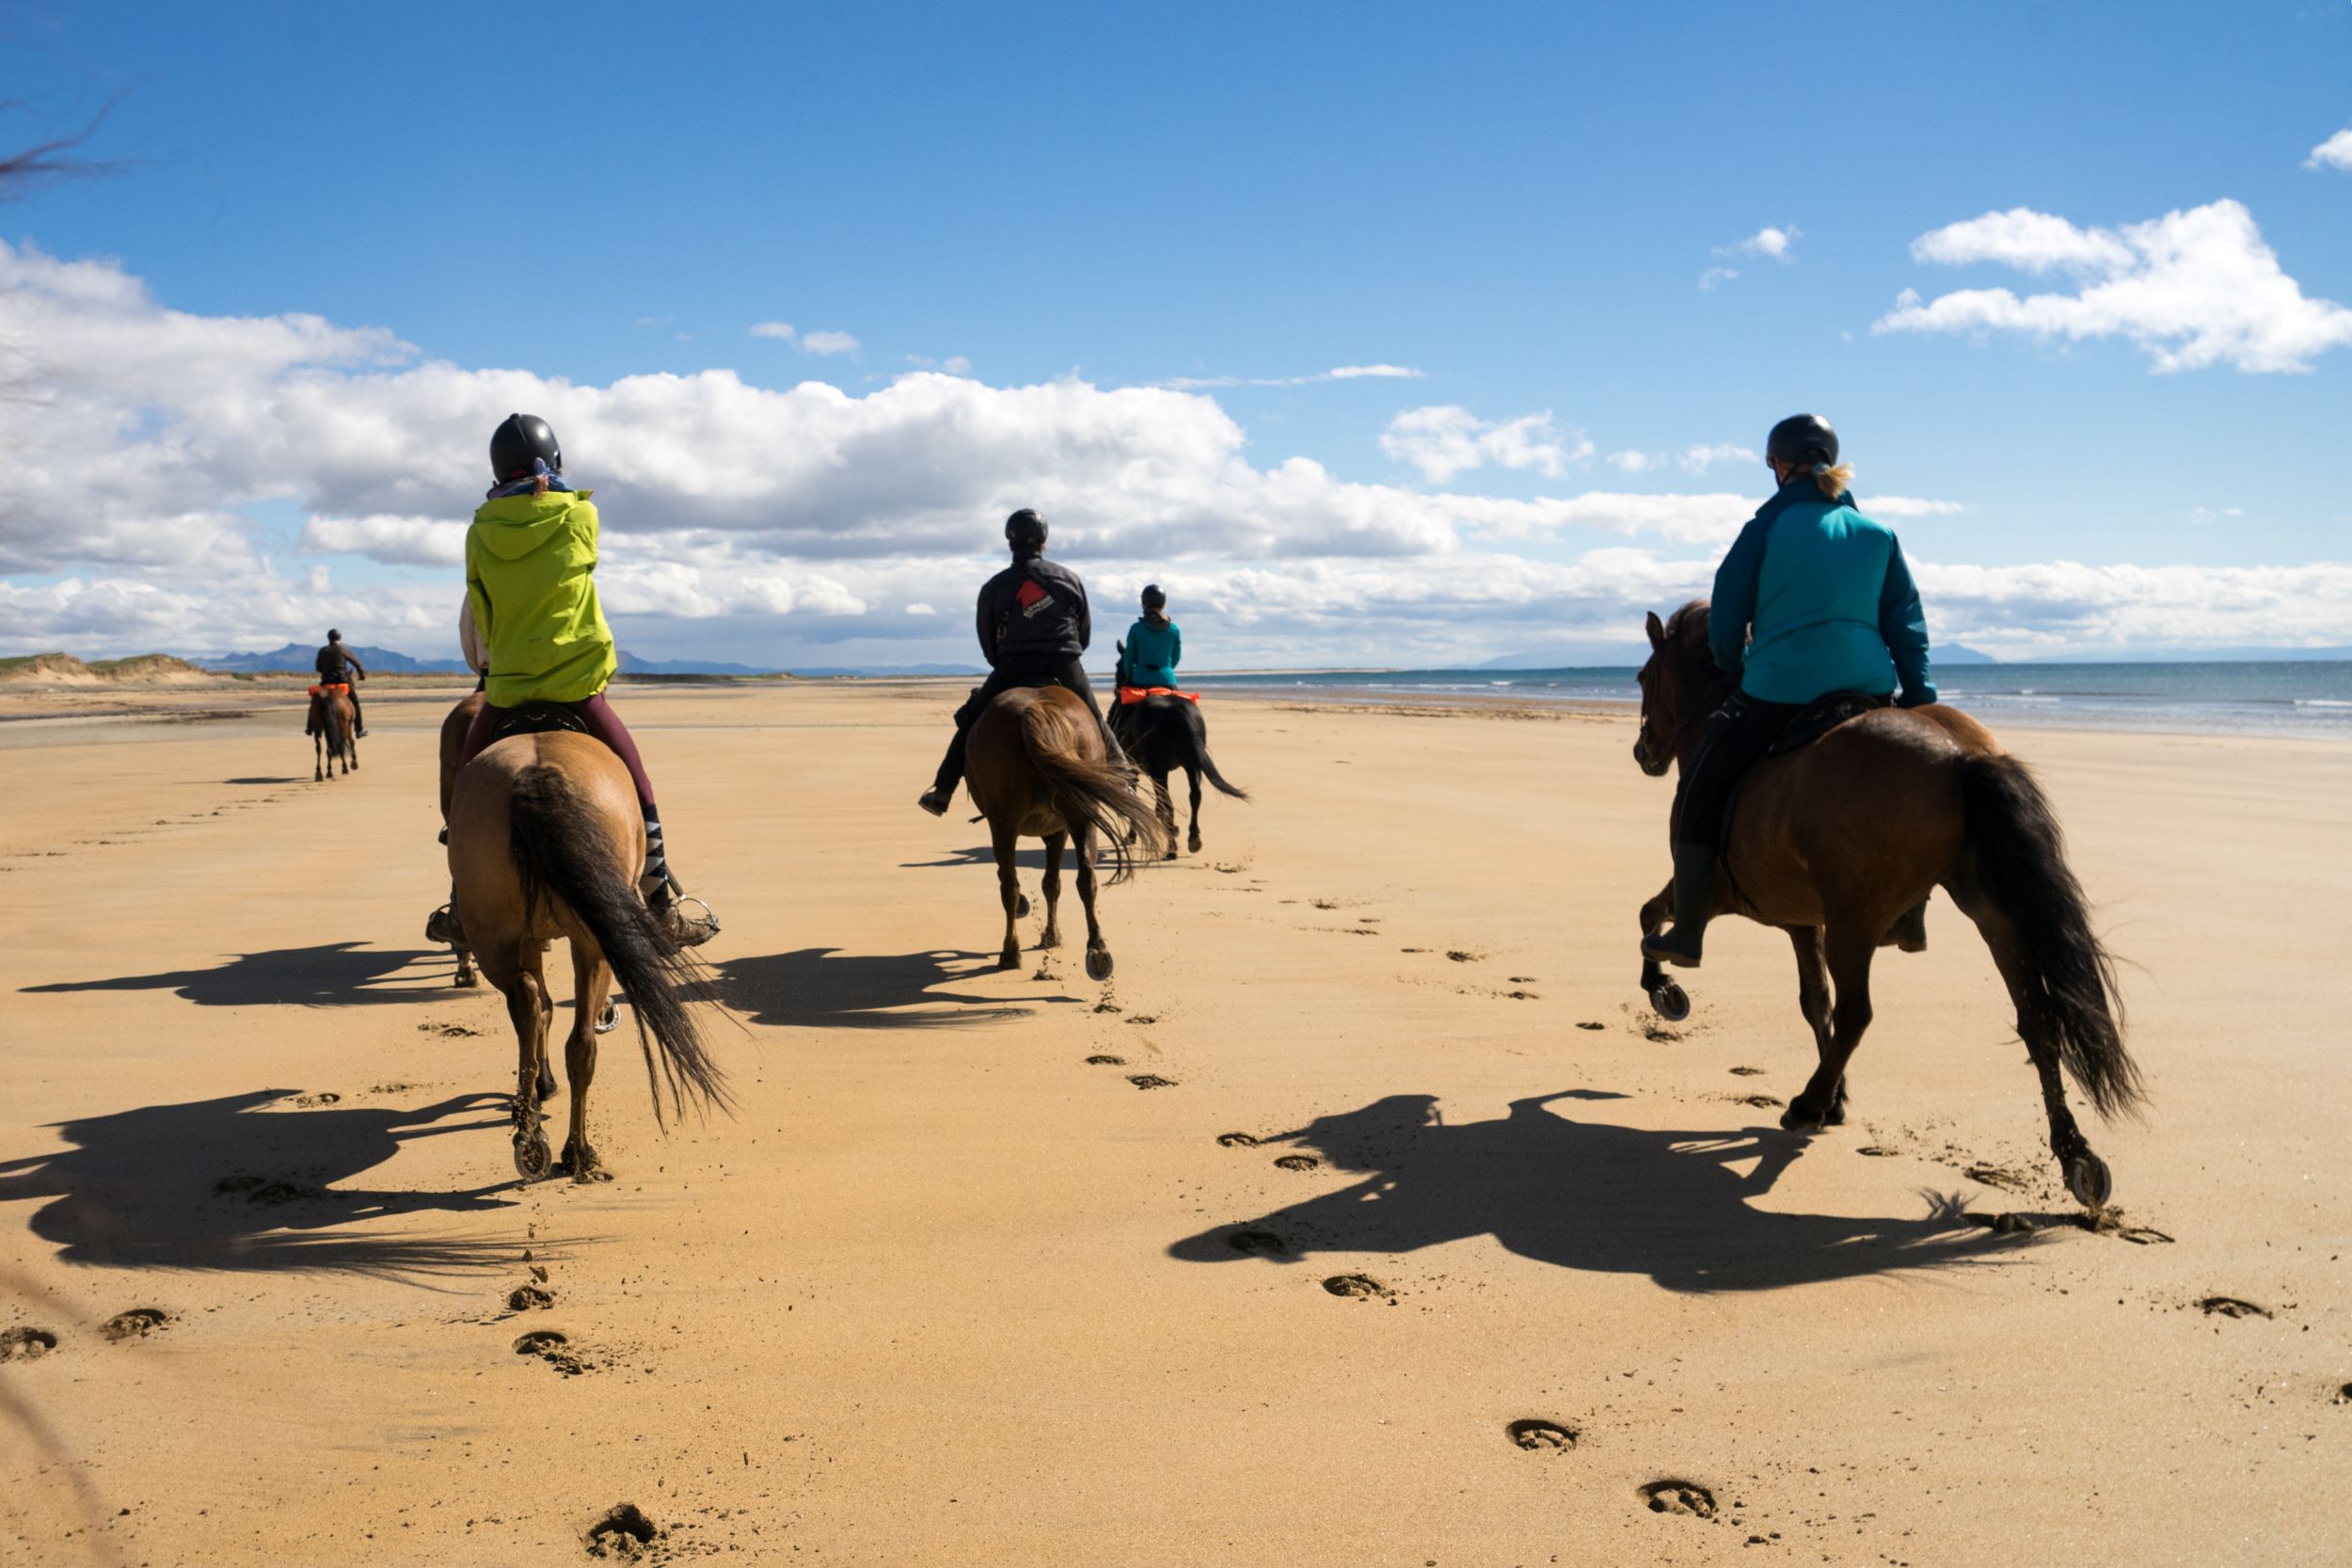 5 horses with riders galloping along a long yellow sand beach in the sunshine. On the right hand side one can see the ocean.